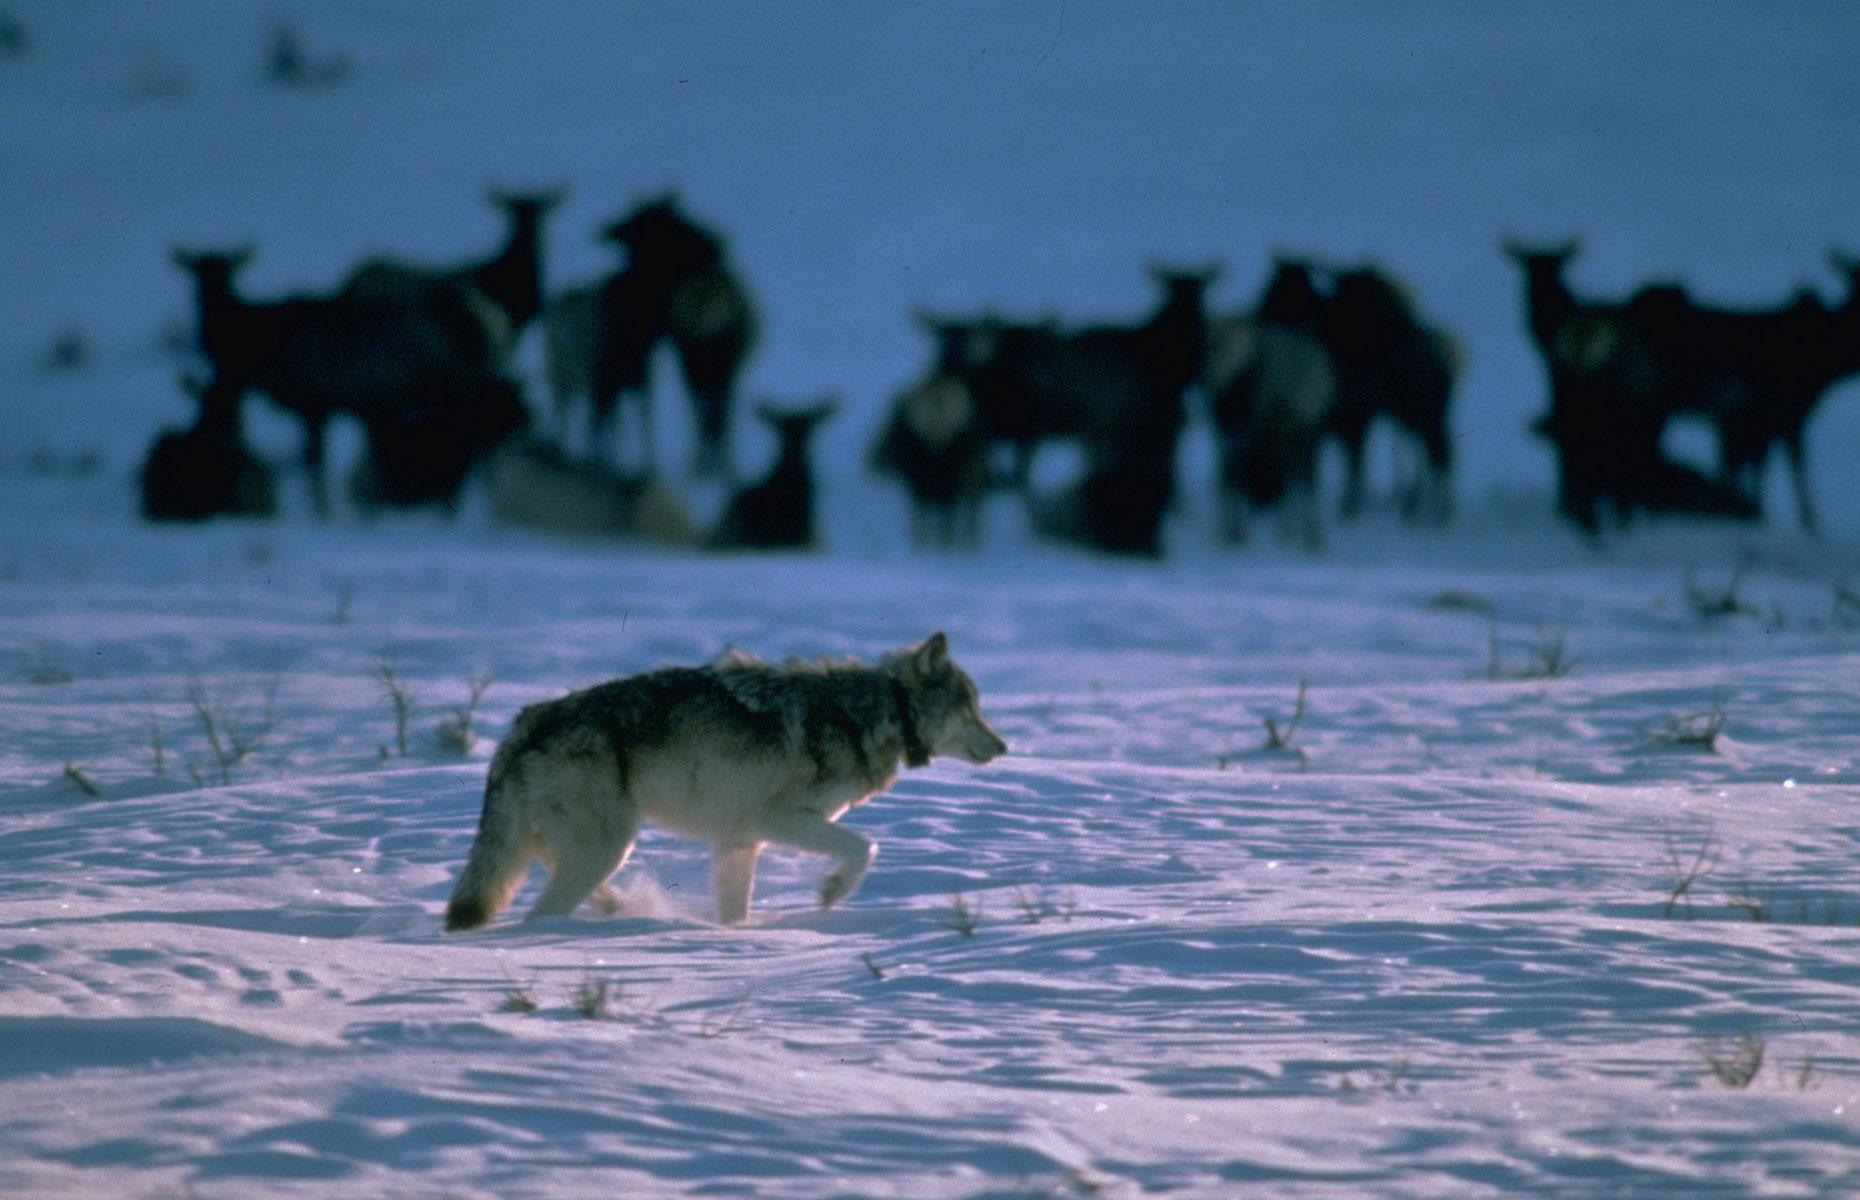 <p>The Nineties was a landmark decade for Yellowstone wildlife. Wolves were hunted into near oblivion throughout the 20th century, but in this decade, experts sought to reverse this. From 1995 through to 1996, 31 grey wolves from Canada were reintroduced to the park. Numbers of these enigmatic predators grew and by 2011, wolves were removed from the endangered species list in Idaho and Montana. </p>  <p><a href="https://www.loveexploring.com/news/76305/of-bison-and-bears-why-yellowstone-reminds-us-of-our-place-on-the-planet"><strong>Of bison & bears: why Yellowstone reminds us of our place on the planet</strong></a></p>